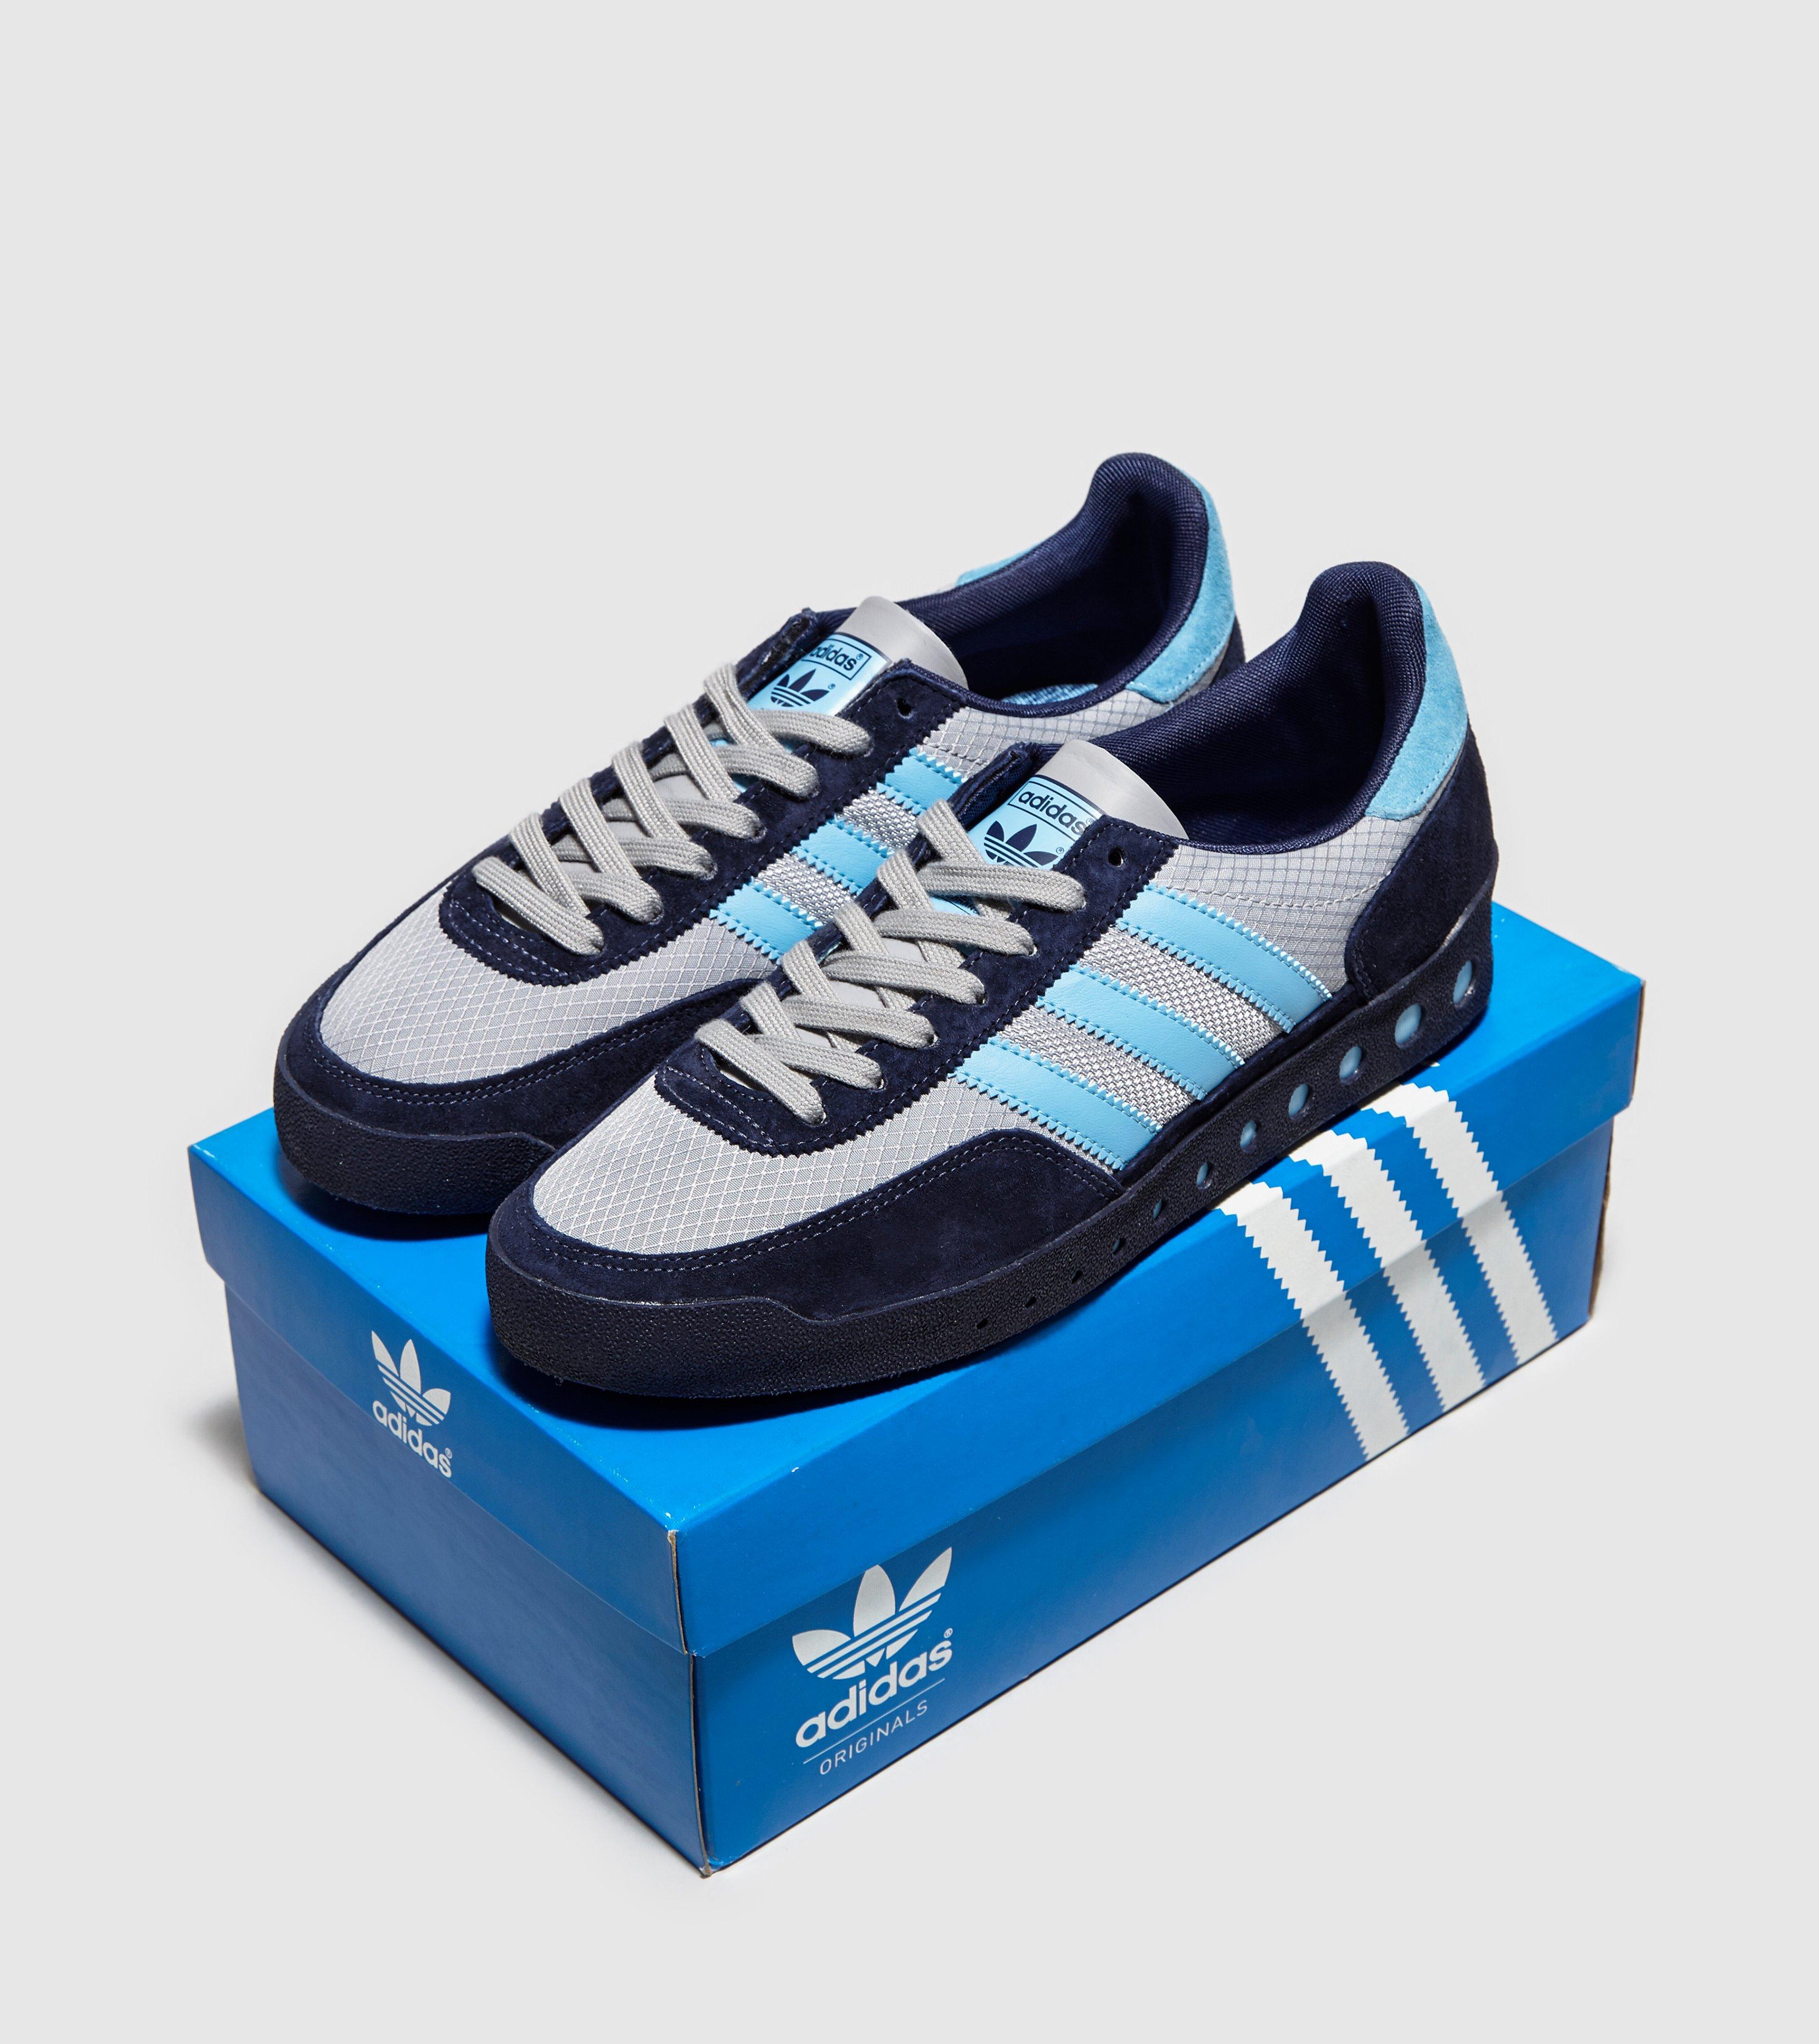 adidas pt 70s limited edition